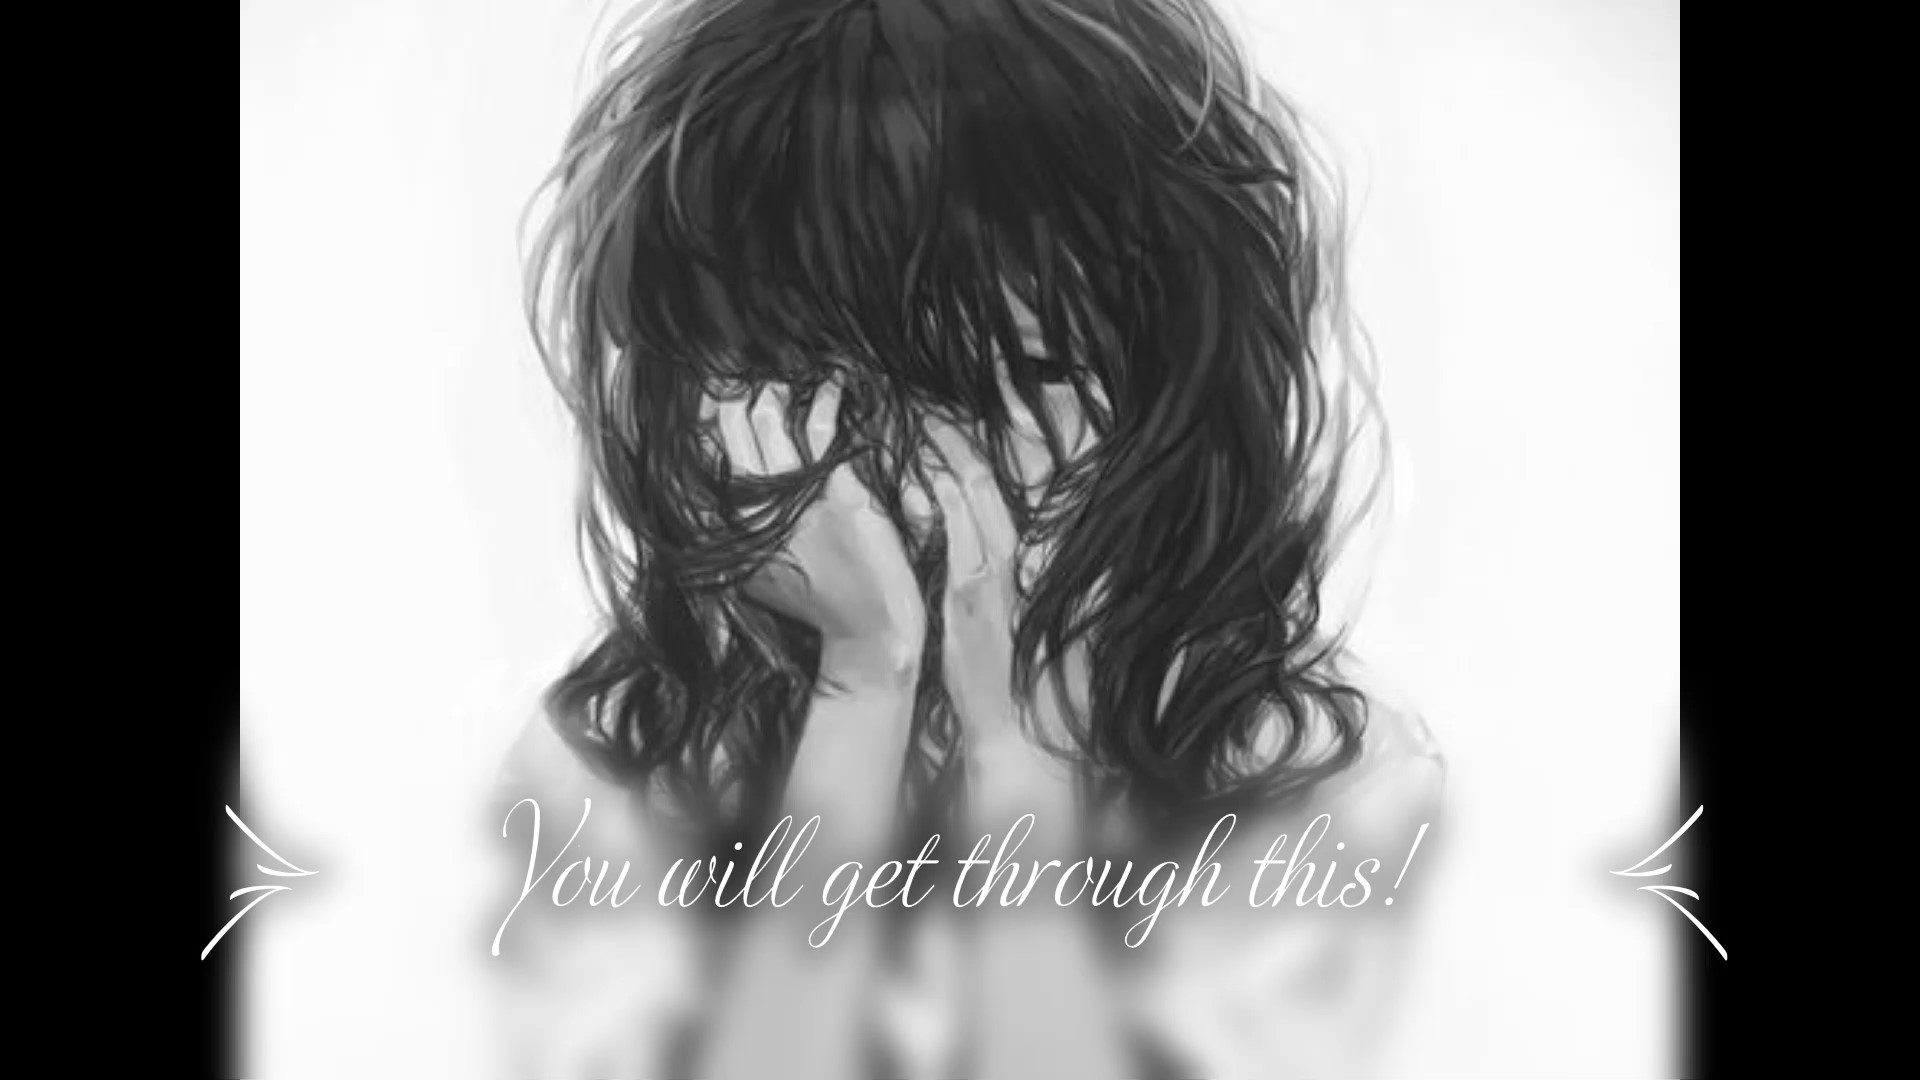 girl with hands covering her face crying. The words say "You will get through this"